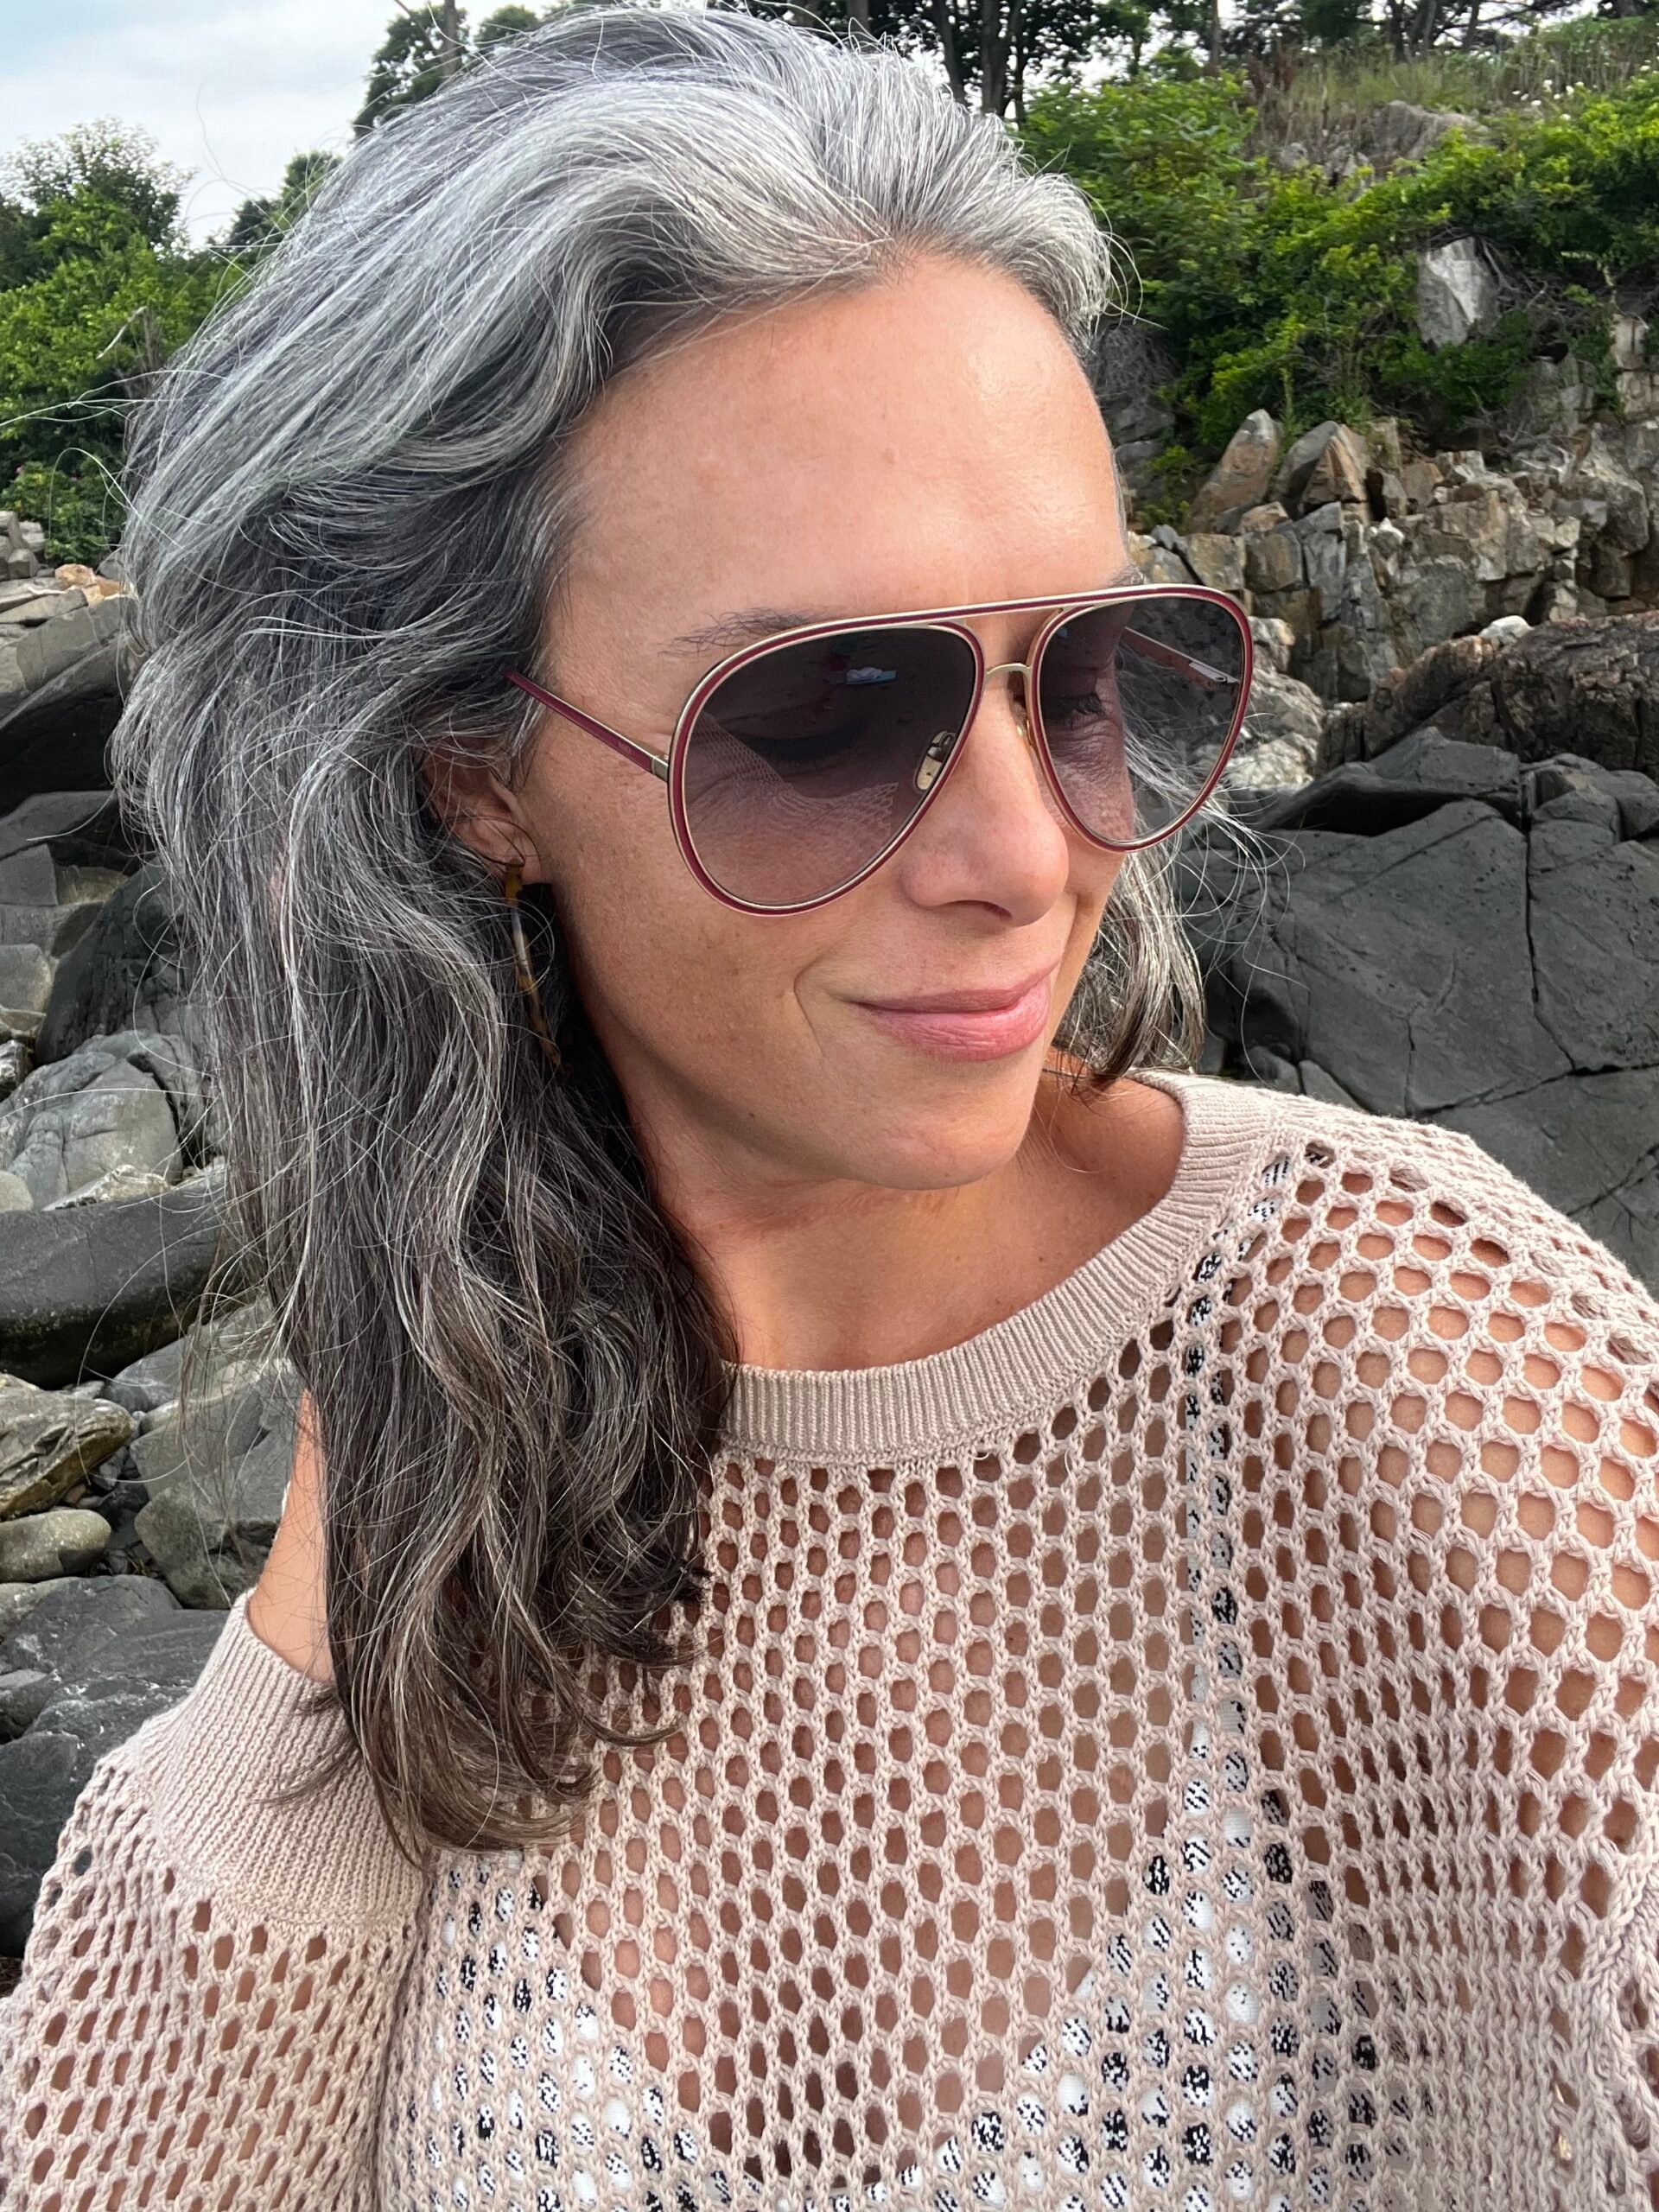 A woman with wavy gray hair sits on the beach.